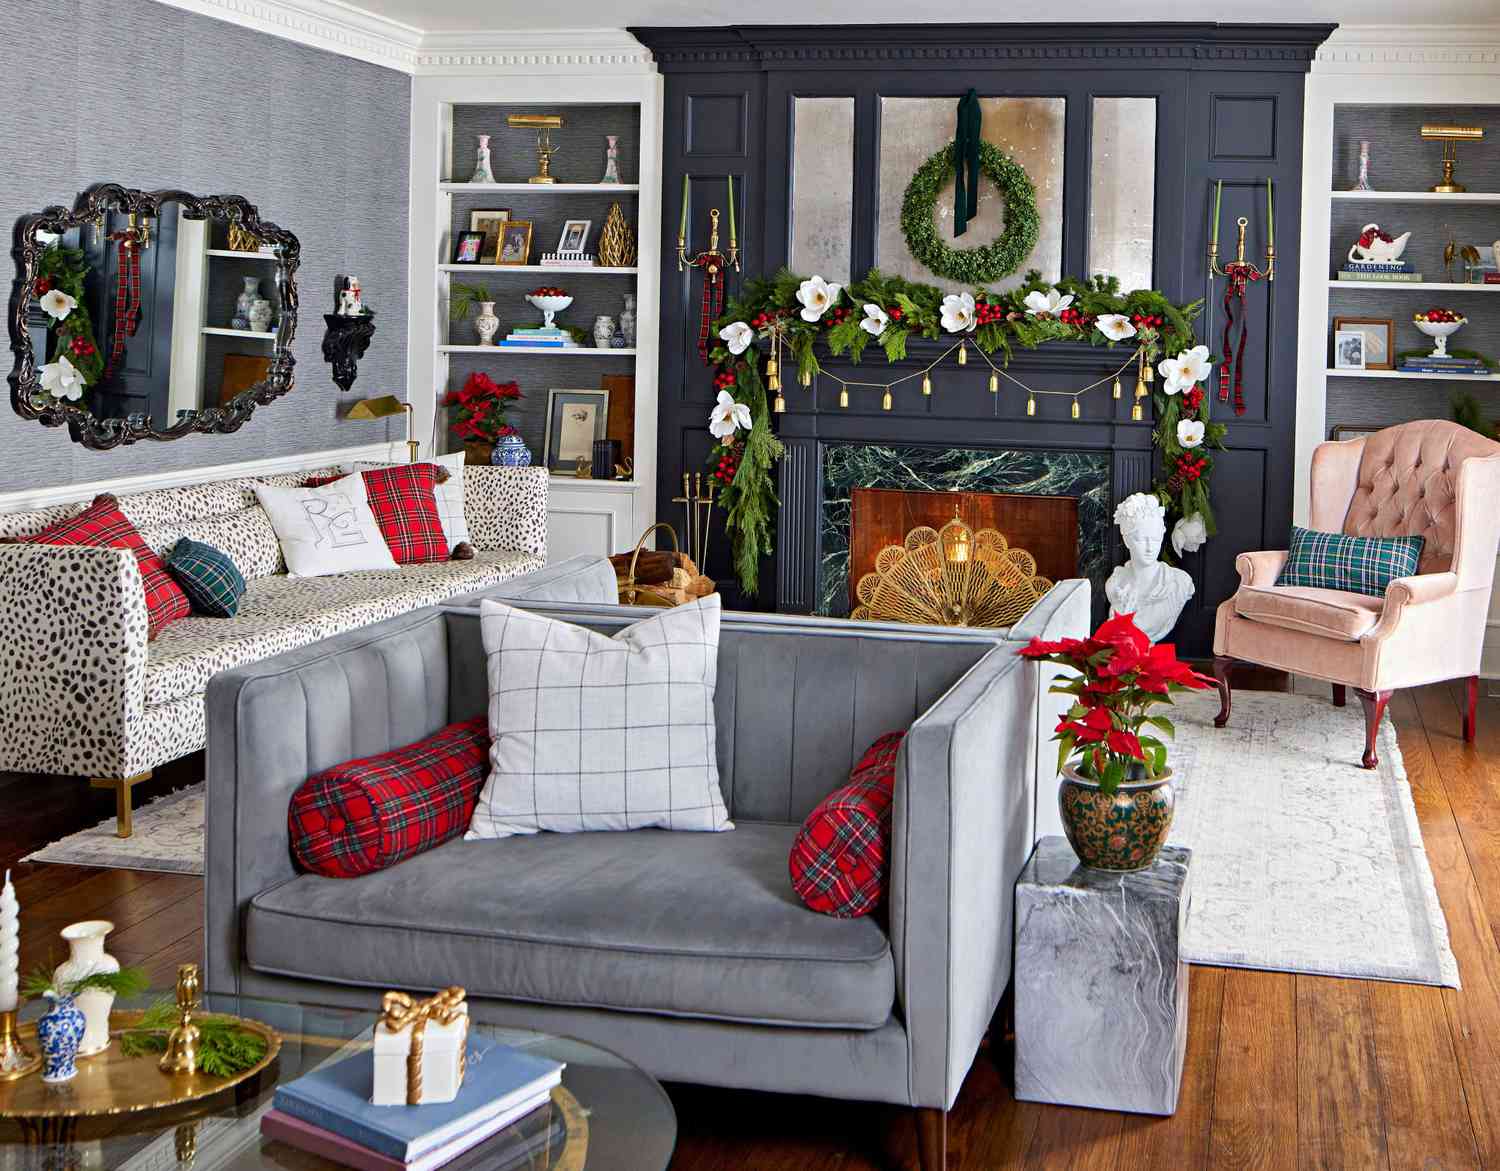 Living room decorated for Christmas with garlands and wreaths